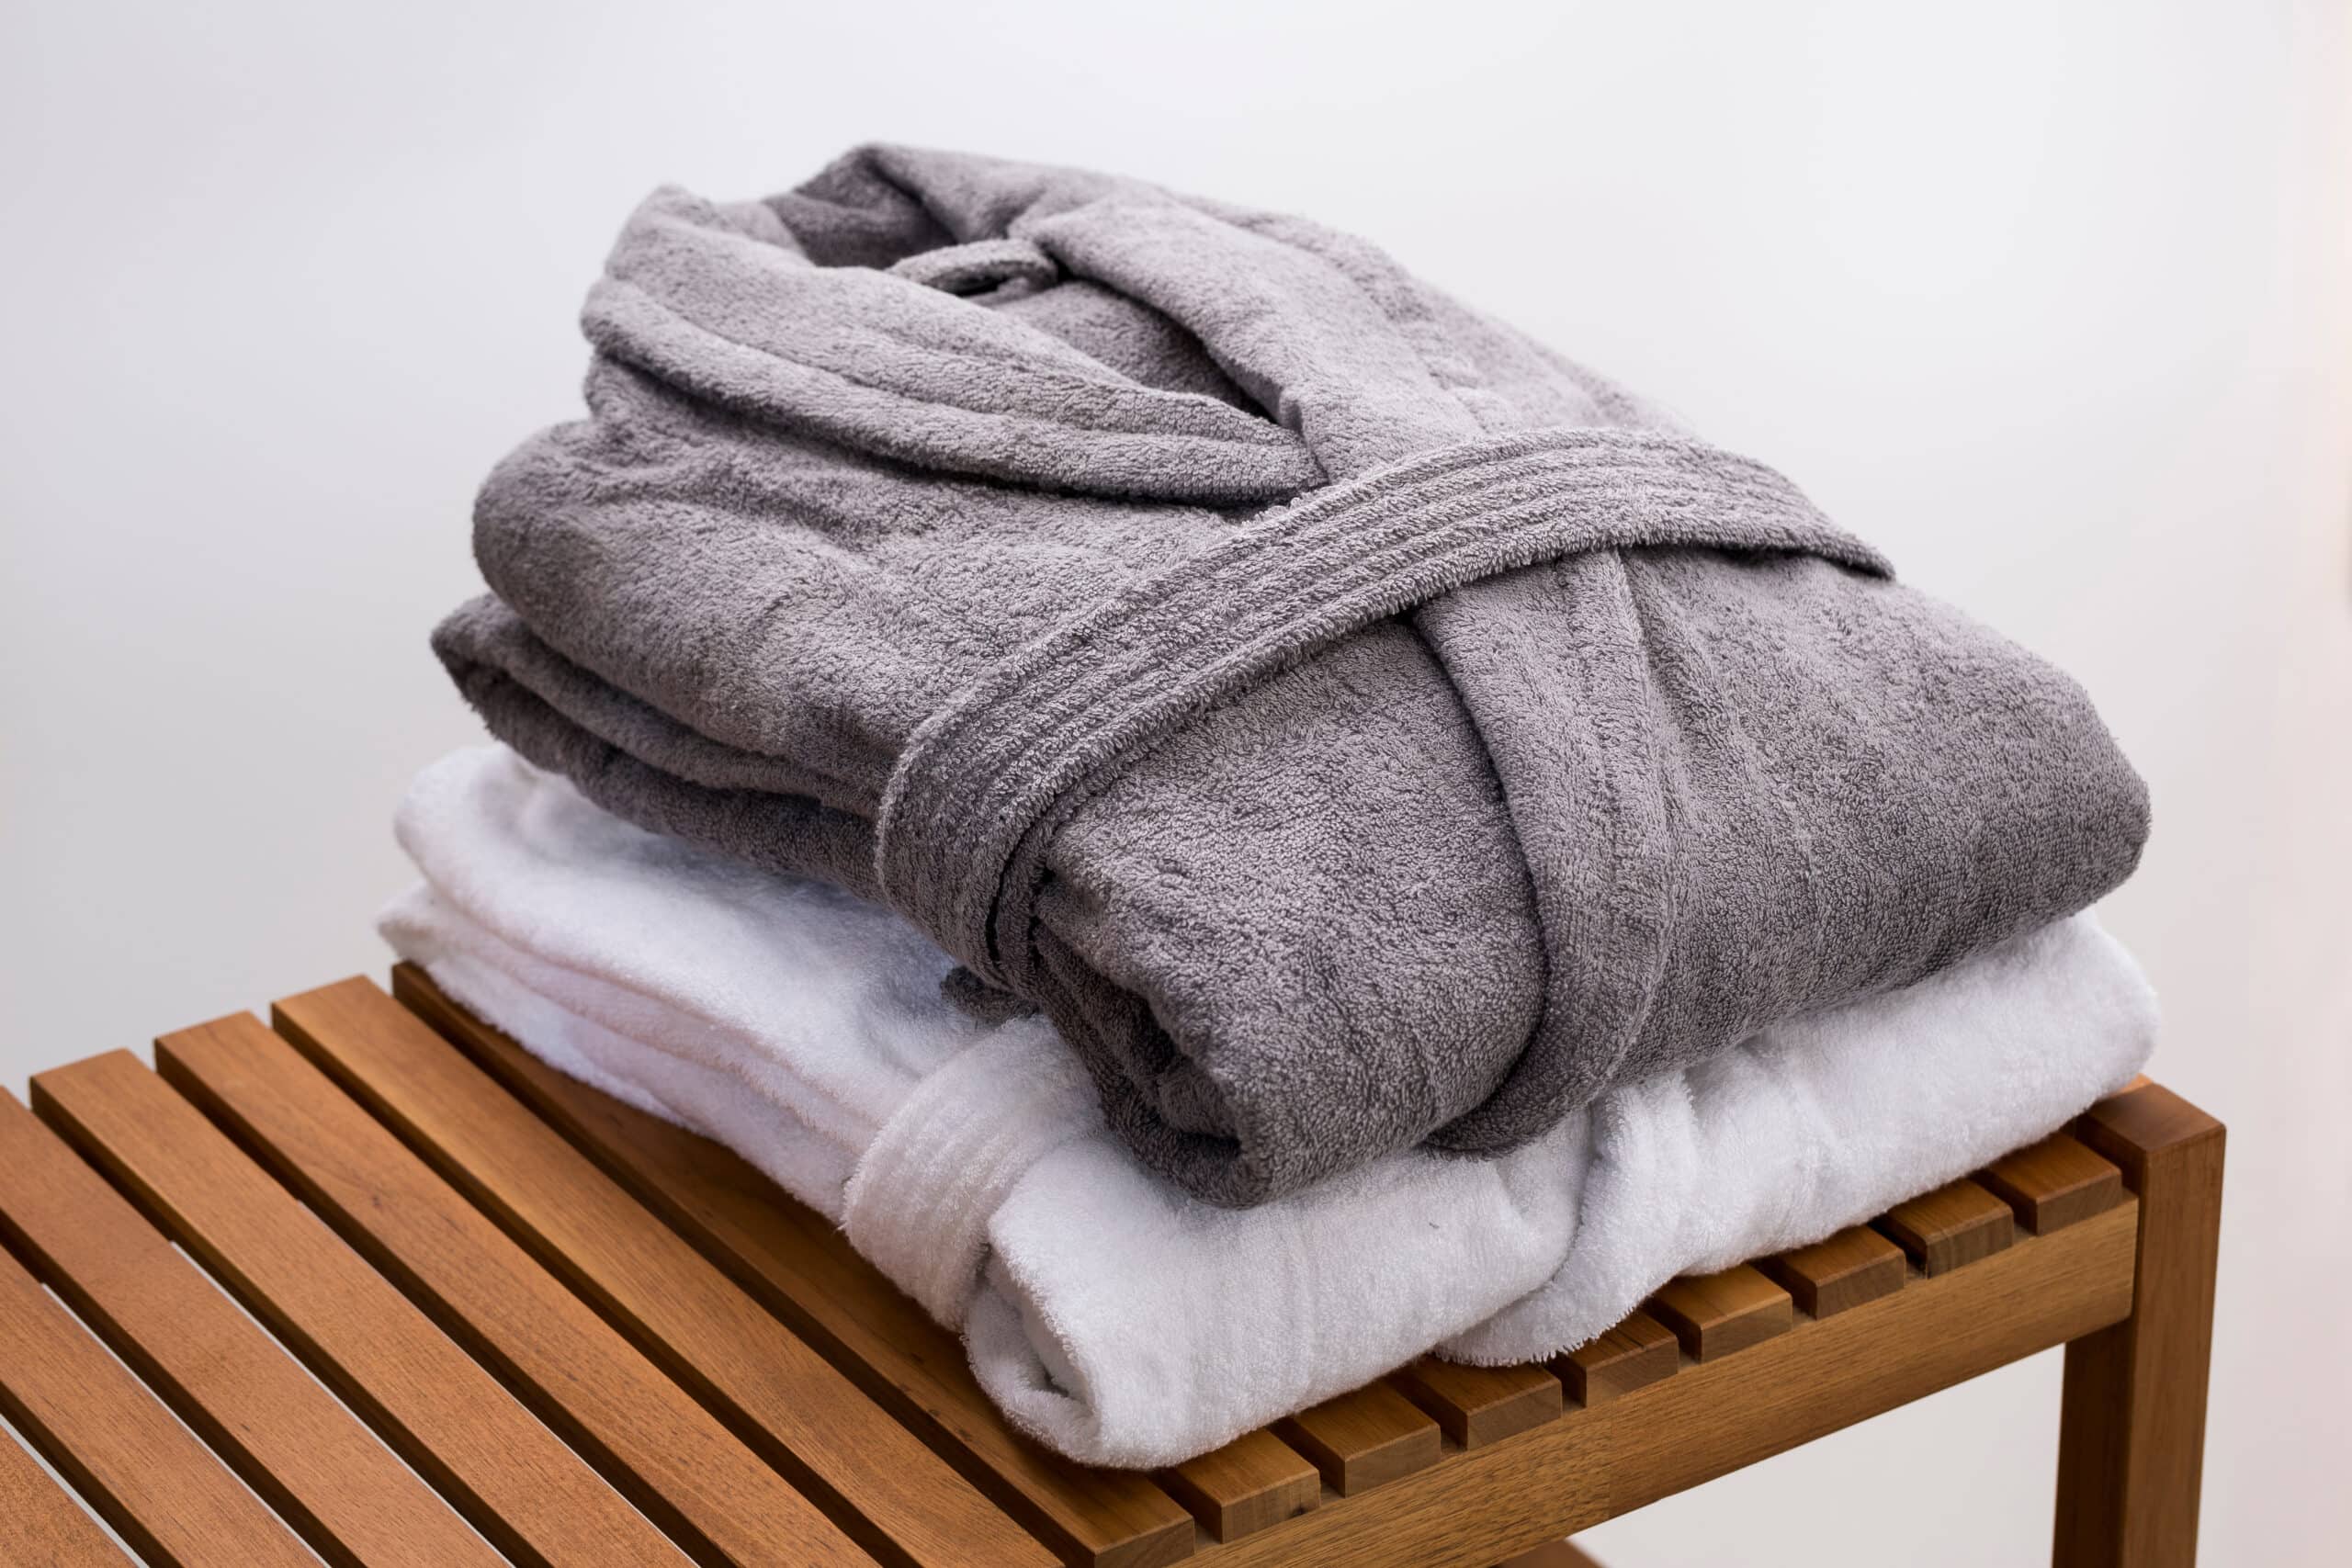 Grey,And,White,Bath,Robes,On,Wooden,Bench